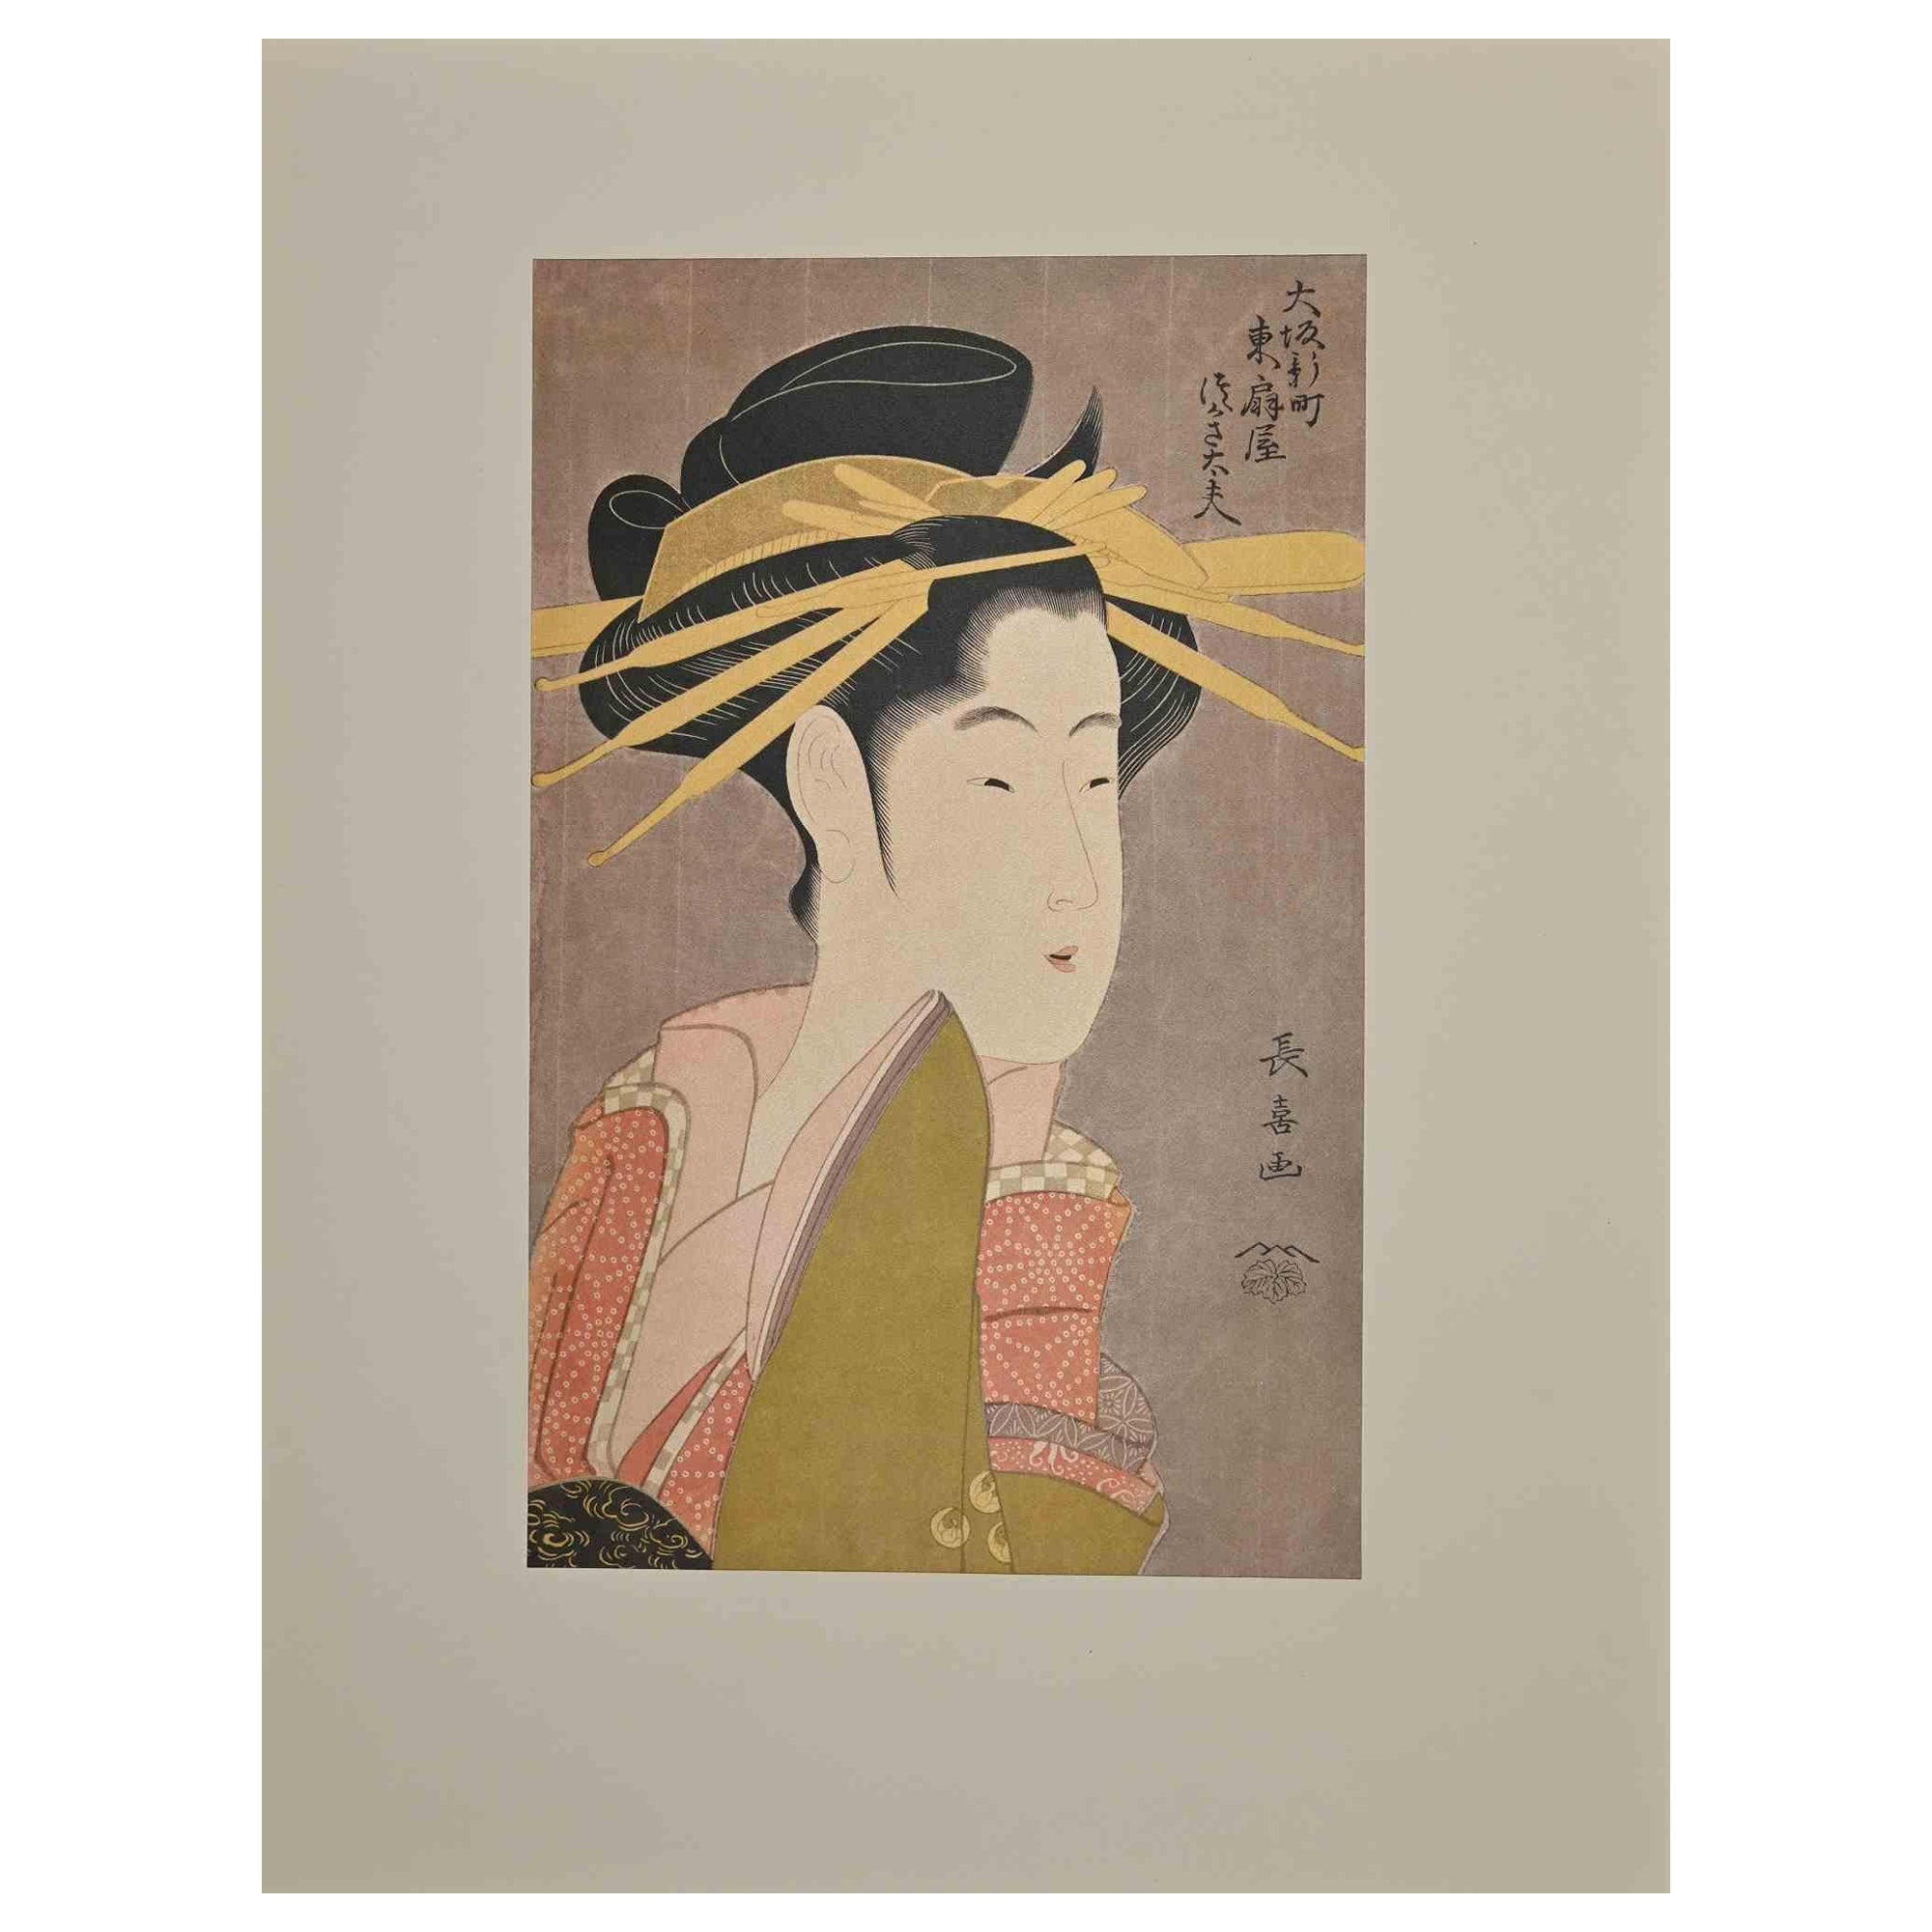 Shiratsuyu of the Wakanayai from the series The Shinmachi Quarter of Osaka (Ôsaka Shinmachi) is a print realized in the mid-20th century after the famous woodcut by Chokosai Eisho, Japanese, Edo period, 1700s AD.

Screen print on silk, after the